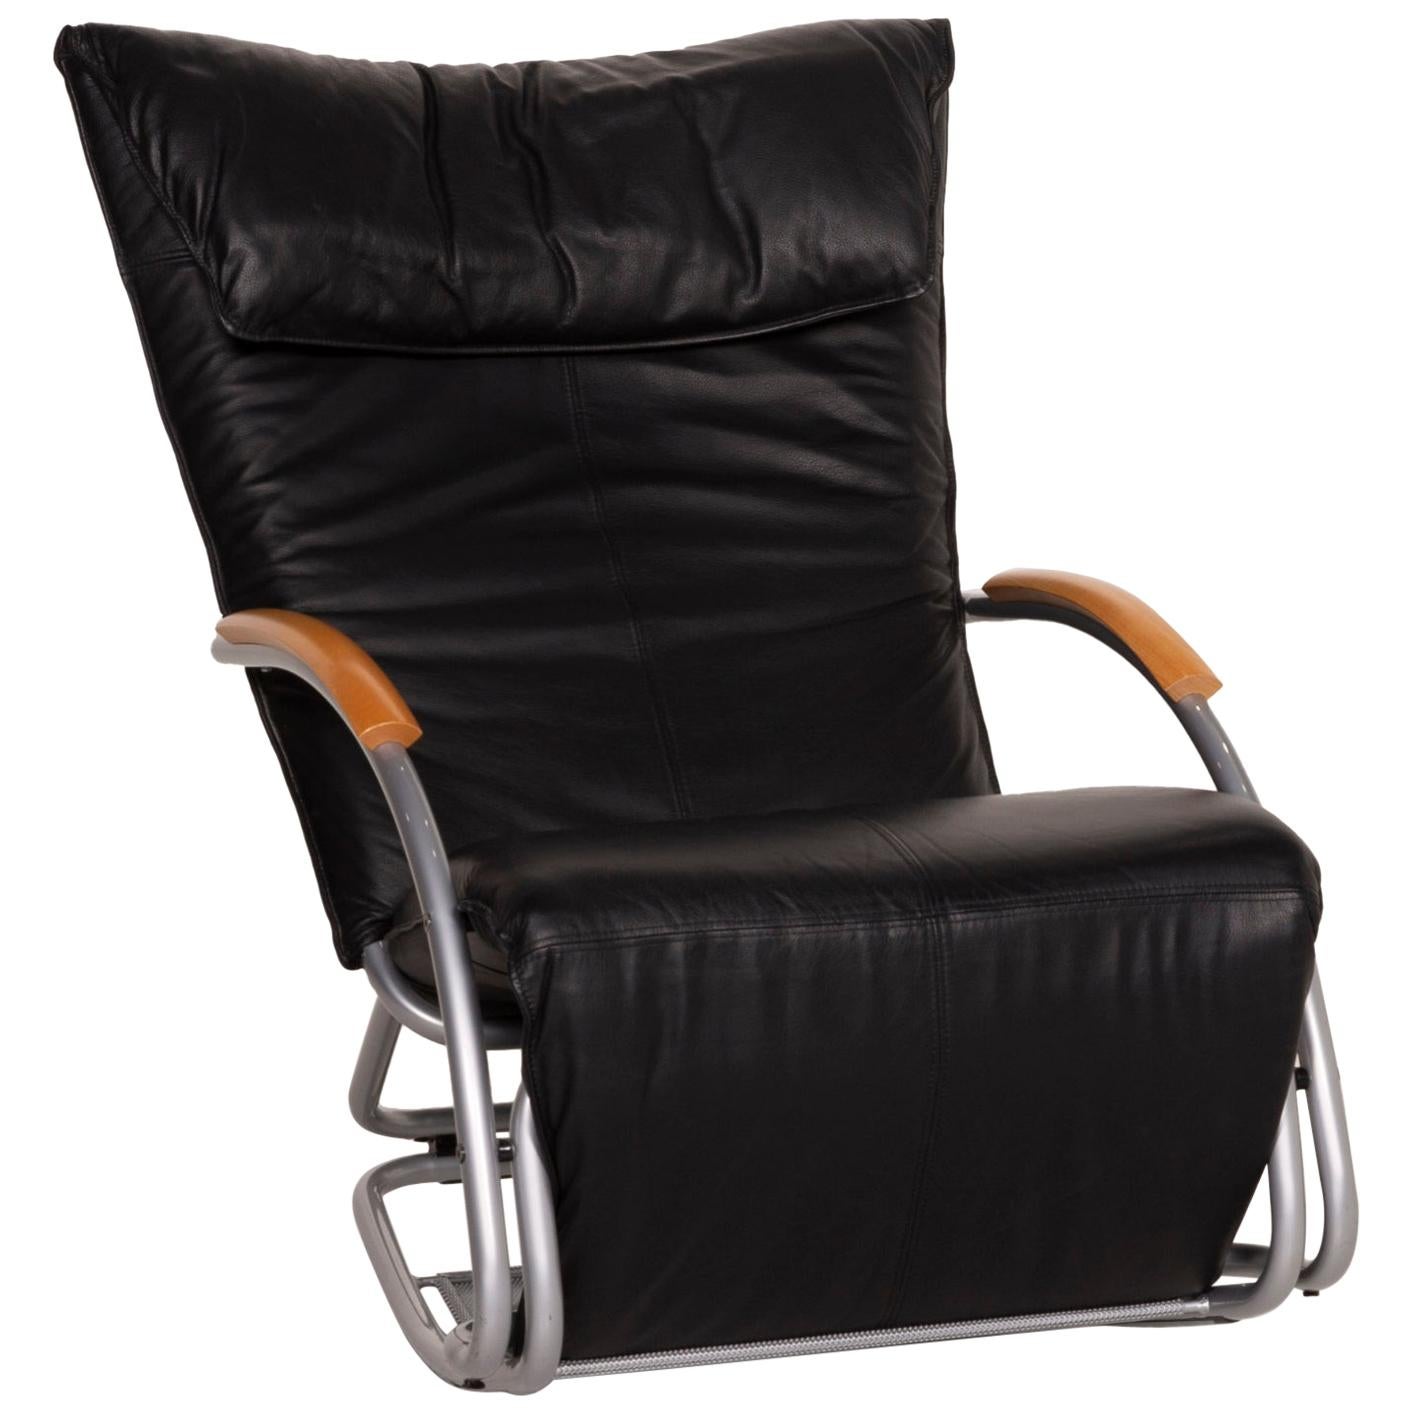 Bonaldo Swing Leather Armchair Black Rocking Chair Relaxation Function Lounger